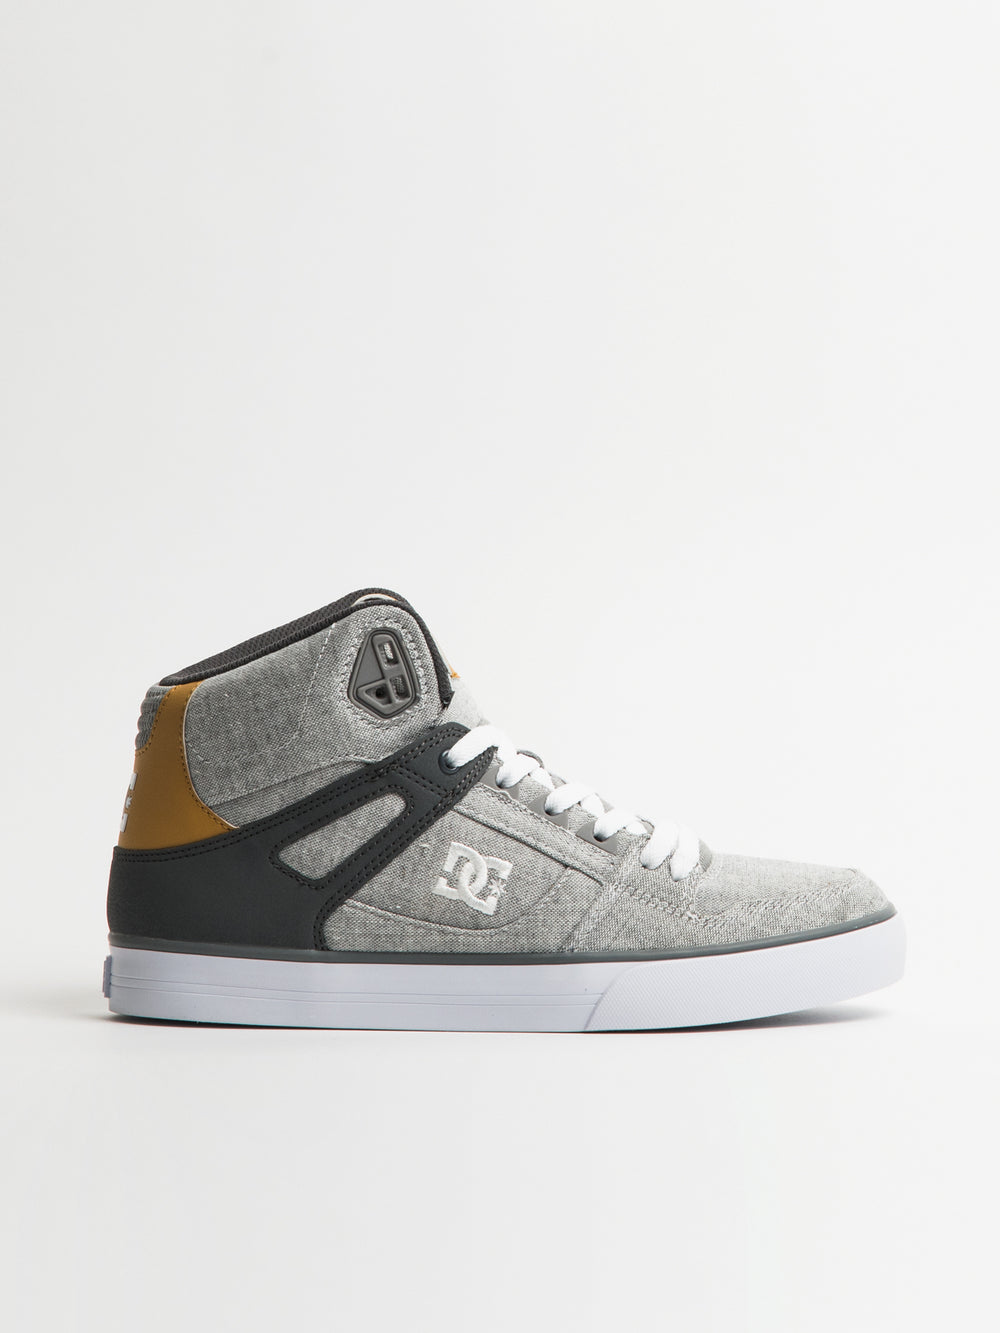 MENS DC SHOES PURE HIGH TOP WC SHOES